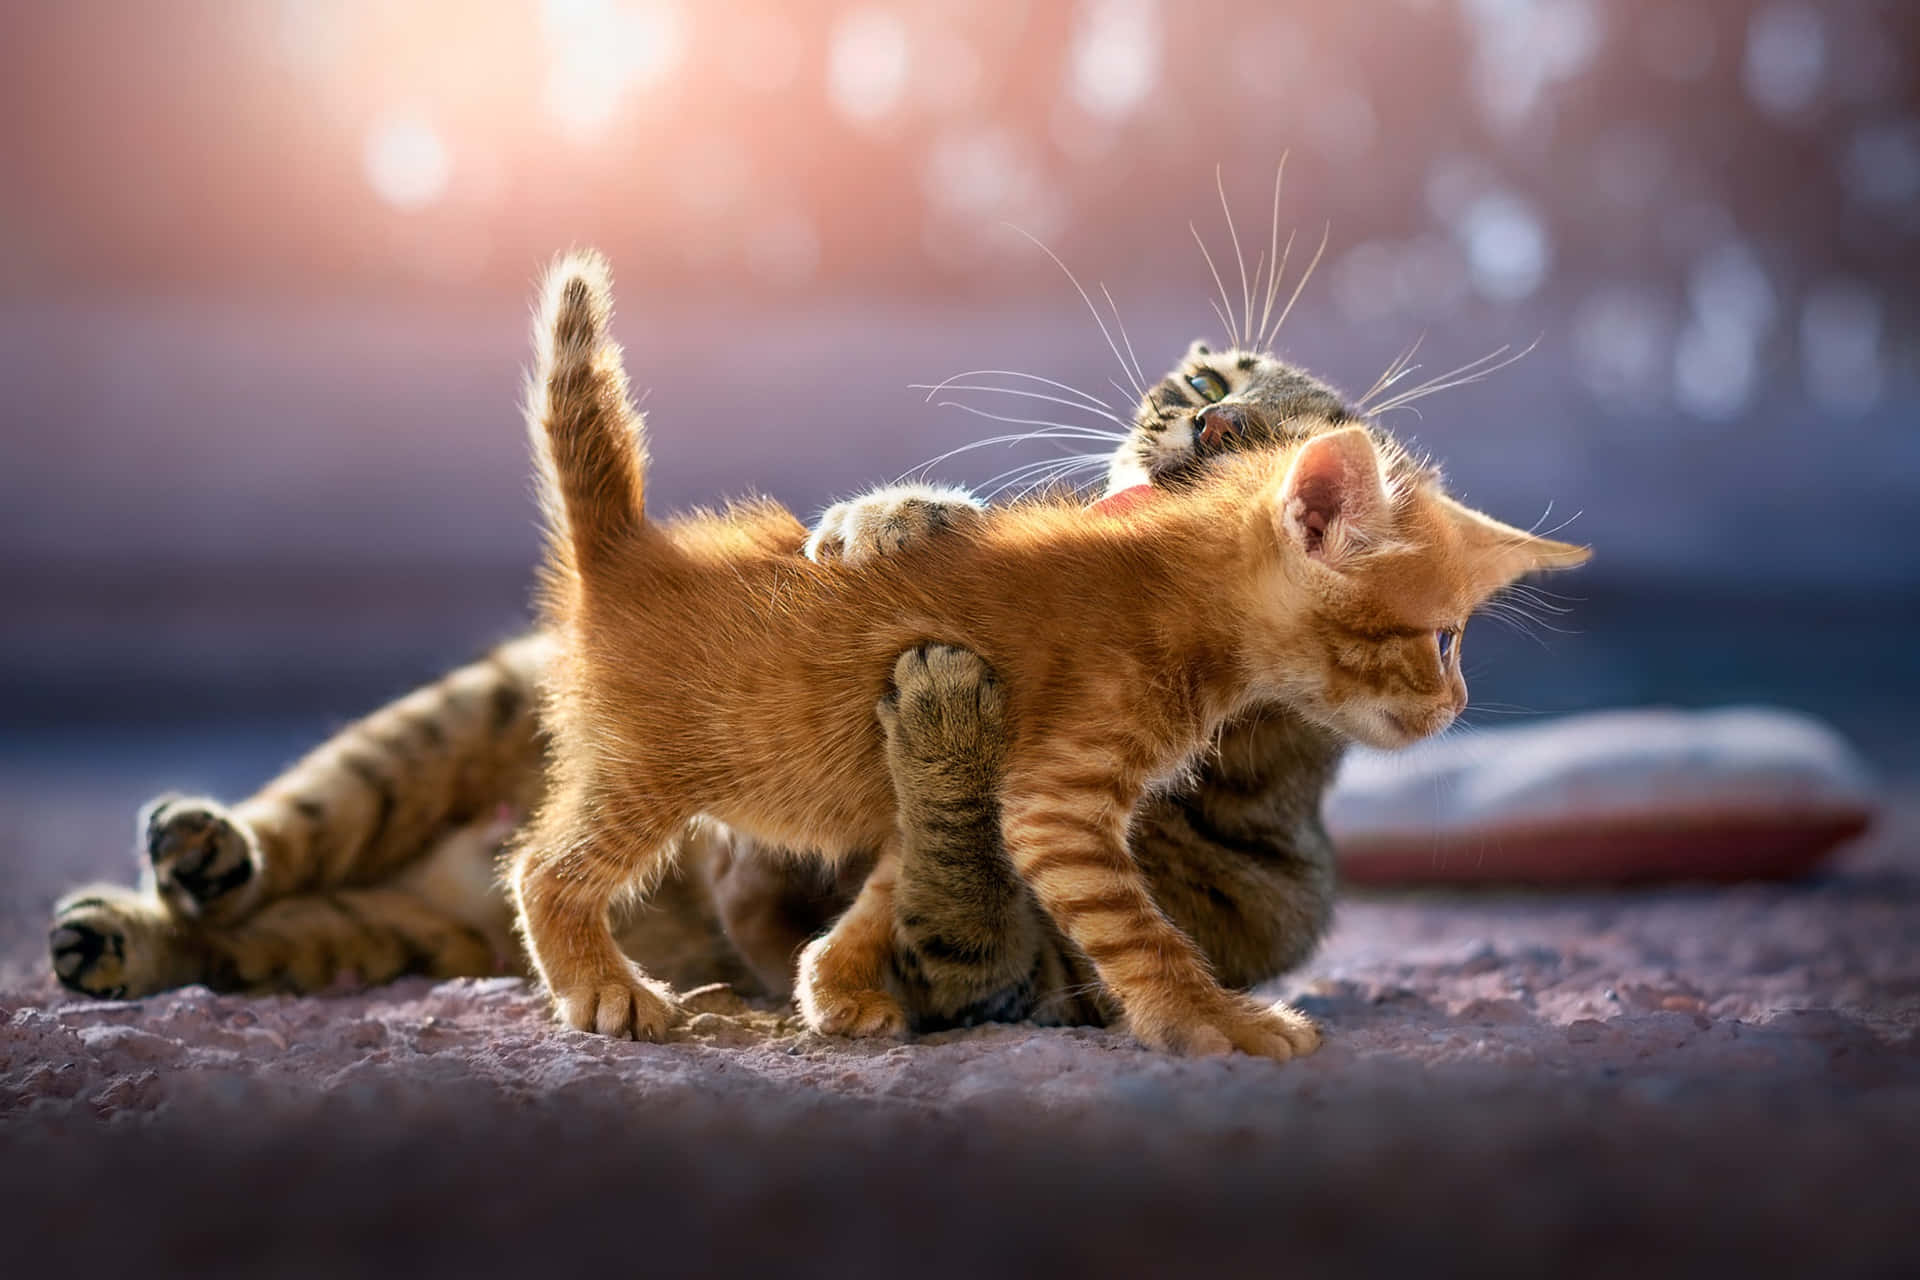 Adorable Fluffy Kittens Playing